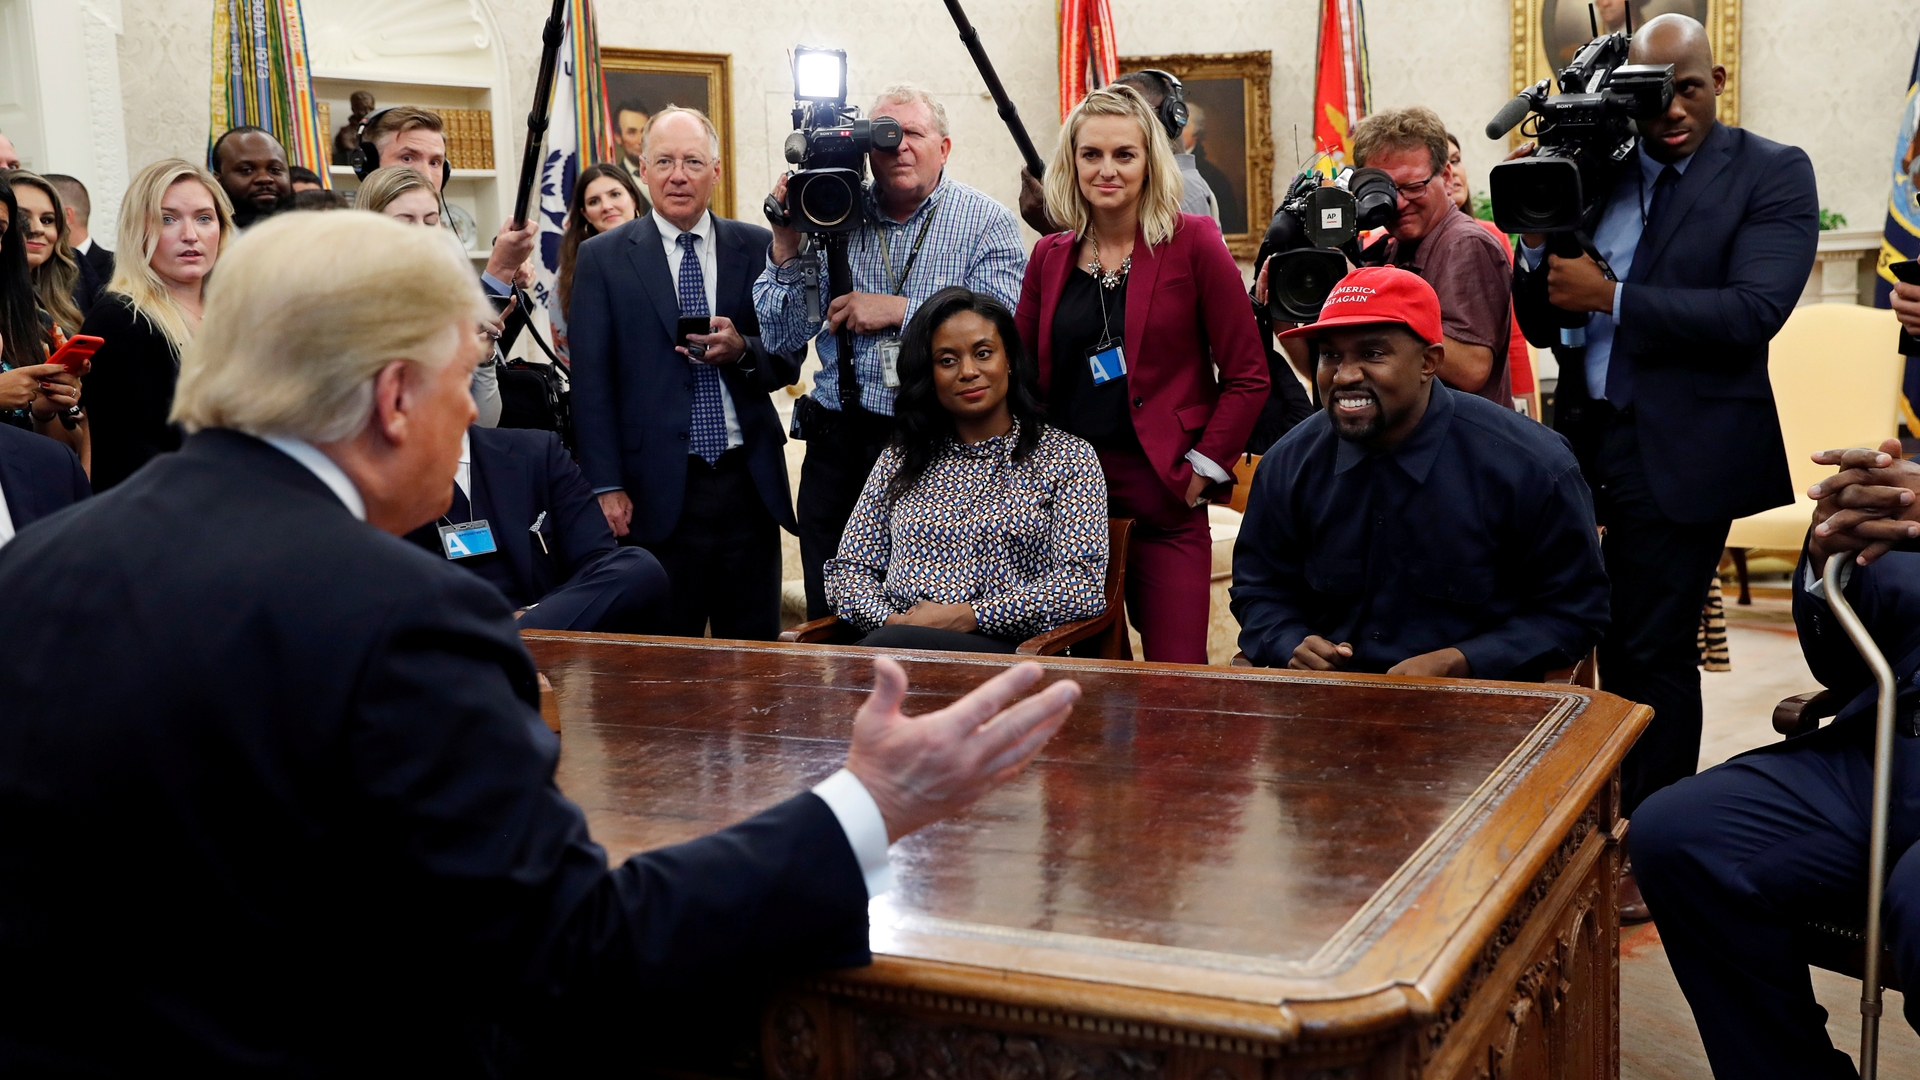 President Trump speaks during a meeting with rapper Kanye West and others in the Oval Office at the White House in Washington